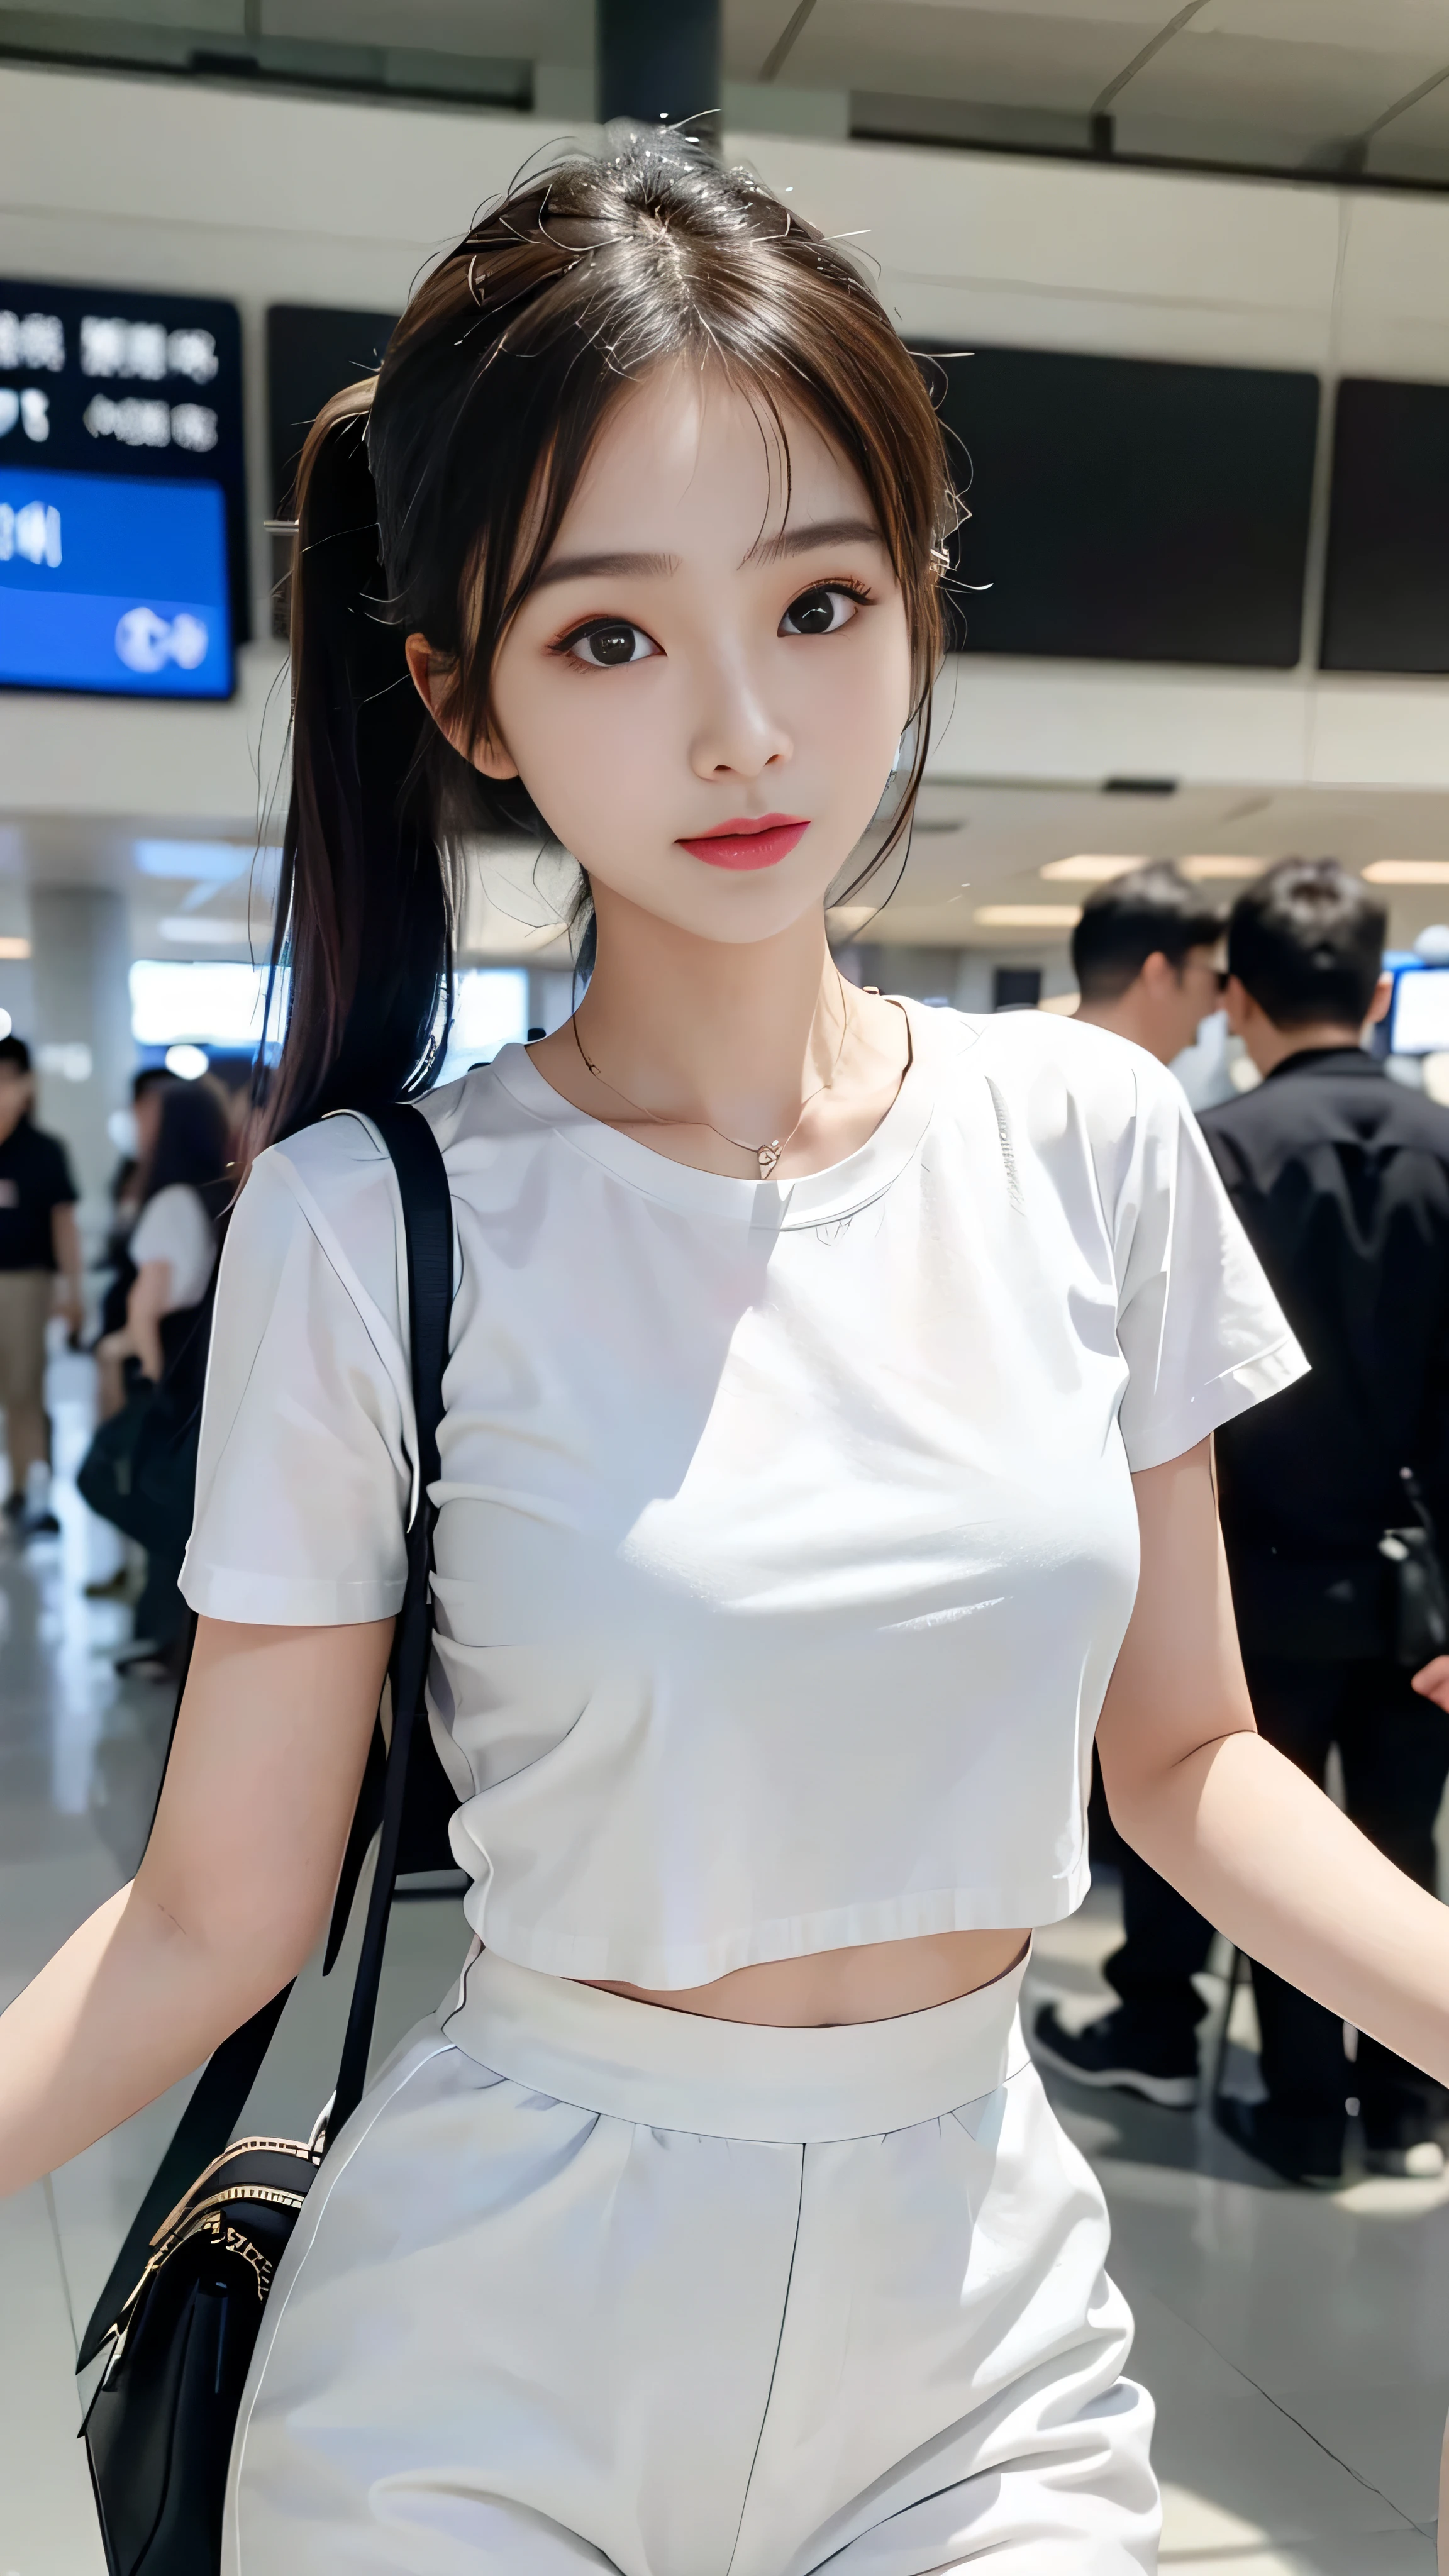 Realistic, ultra-high definition (UHD), 16k, masterpiece: 1.2, photo-realistic: 1.37, a Korean female is captured in an eye-level shot as she walks through the airport terminal. Her crossed bangs frame a slightly yet captivating smile. Wearing a casual white t-shirt, her outfit radiates comfort and effortless style. The blurry backdrop of the airport creates a sense of motion and a POV perspective, immersing the viewer in the scene. Her eyes, with their striking contrast and long lashes, catch the viewer's attention. High-resolution details accentuate her facial features, showcasing her